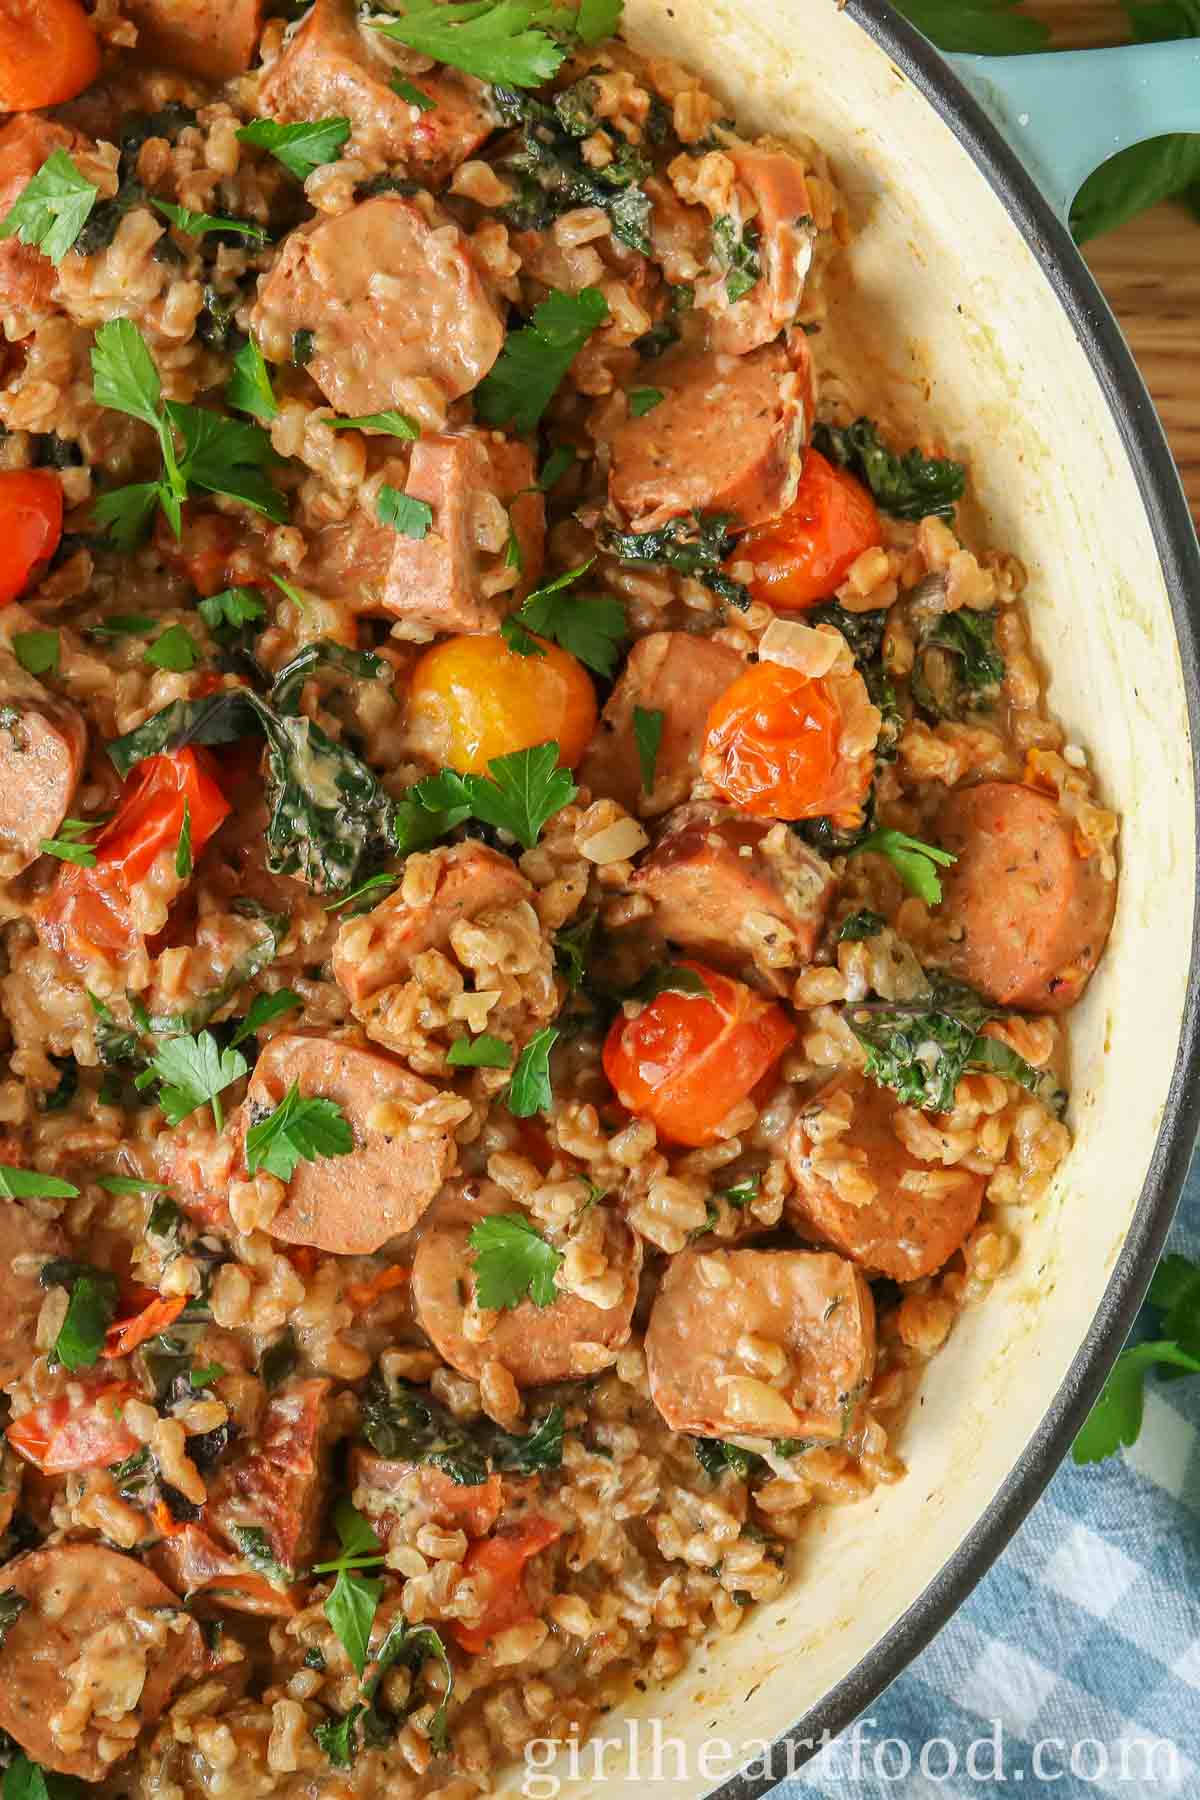 Close-up of a pan of sausage, farro and vegetables garnished with parsley.